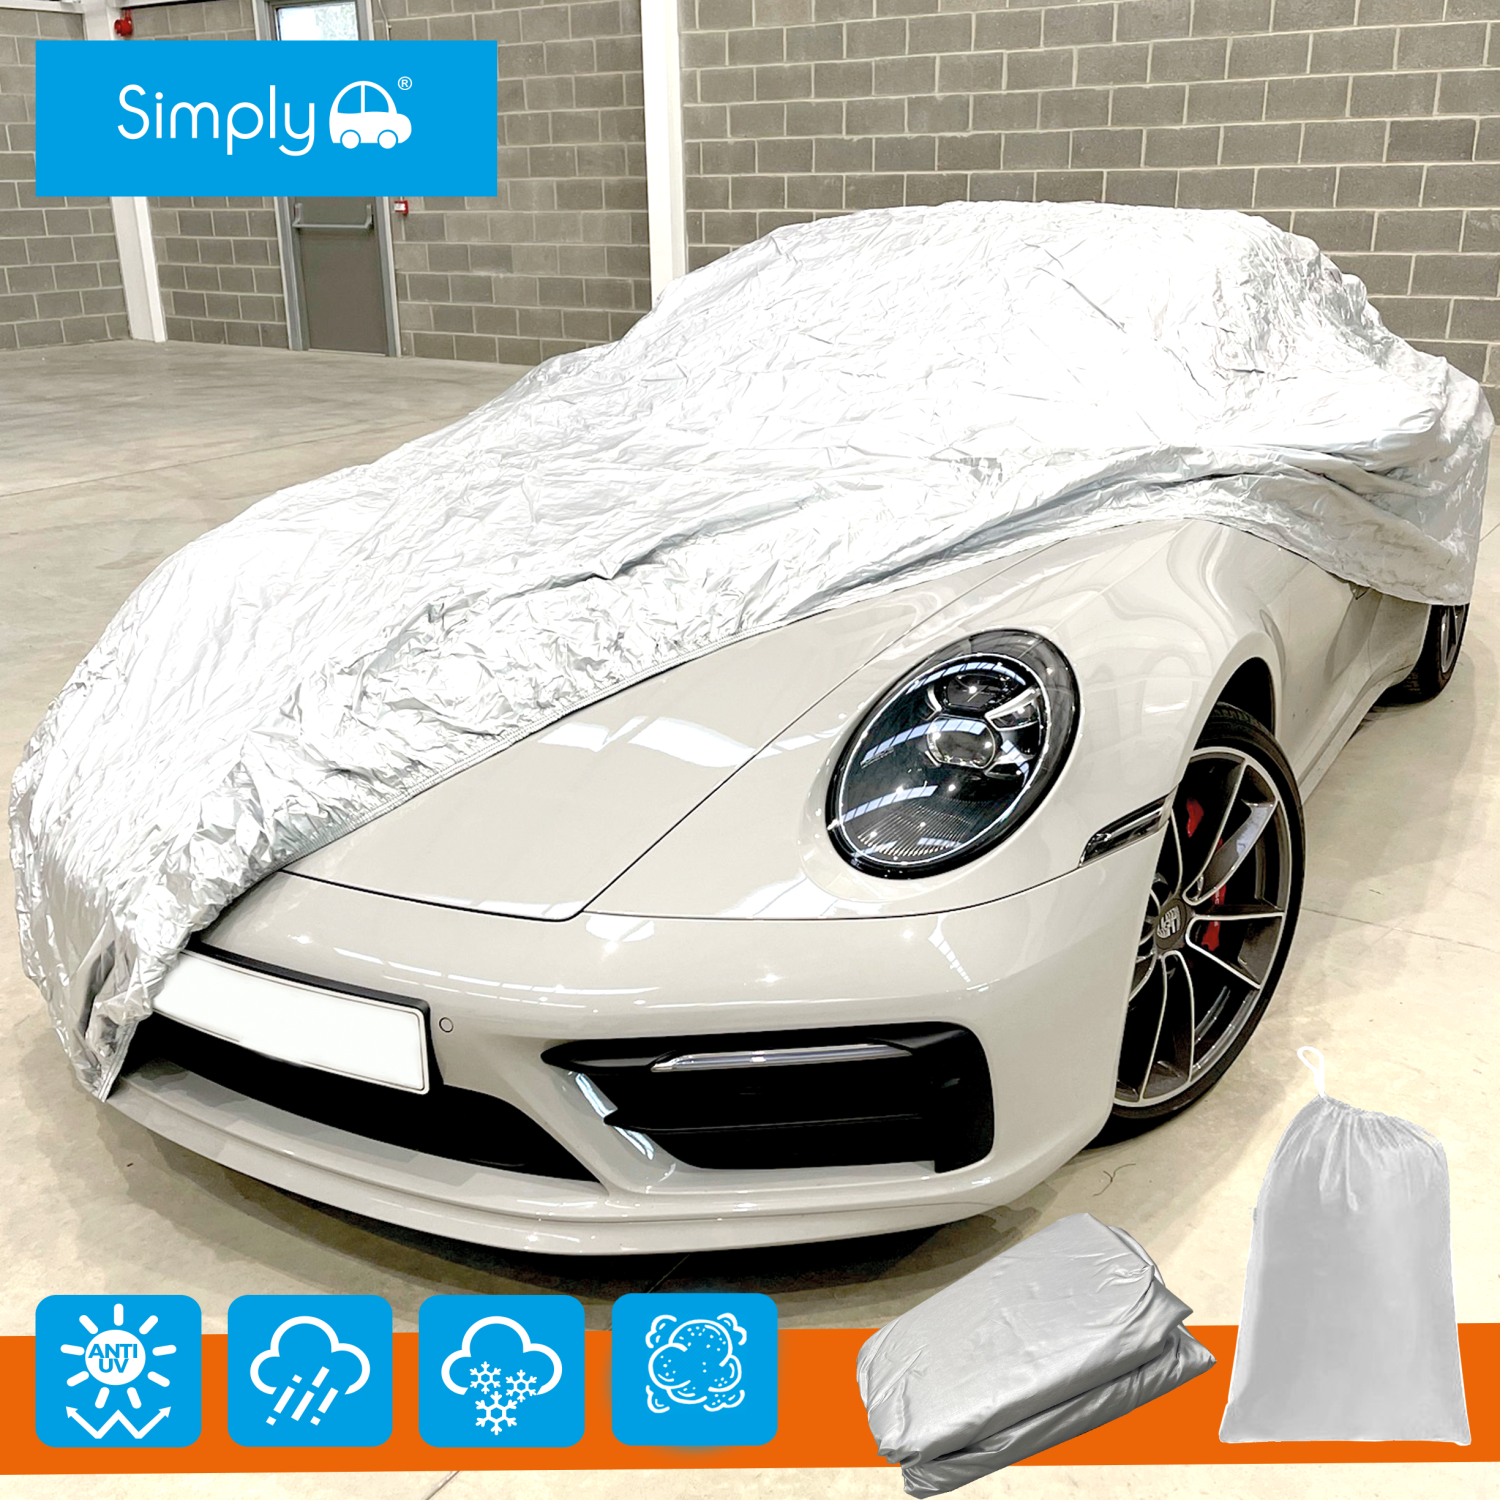 Simply Auto 'S' WATER RESISTANT CAR COVER - BCC1